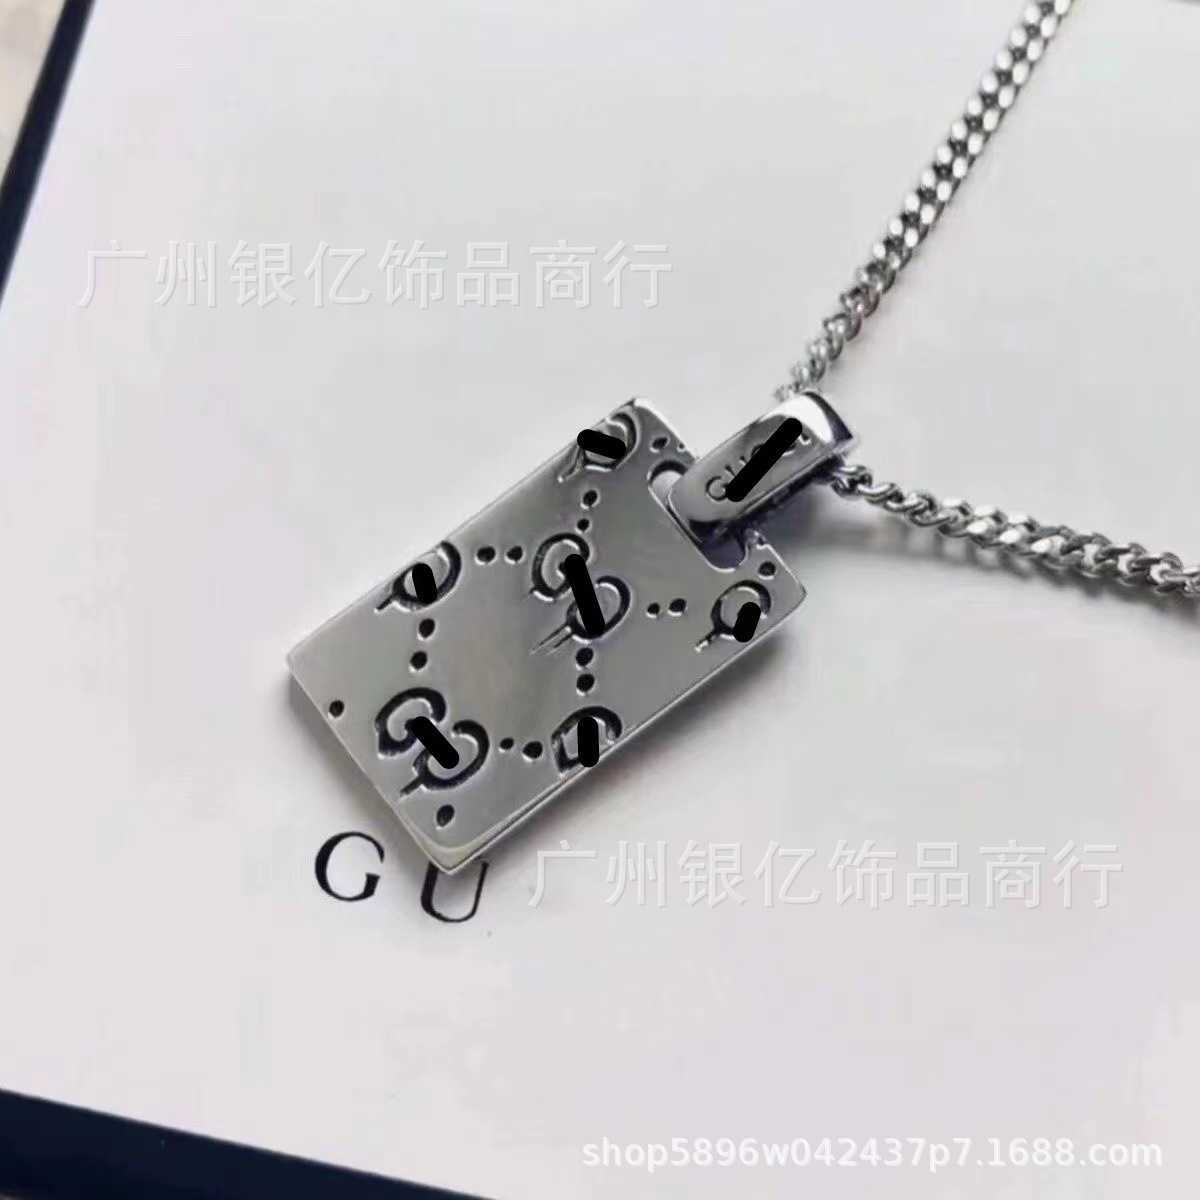 20% OFF 2023 New Luxury High Quality Fashion Jewelry for Copper Silver Plated Skull Head Square Necklace Genie Sweater Chain Men's and Women's Simple Couple